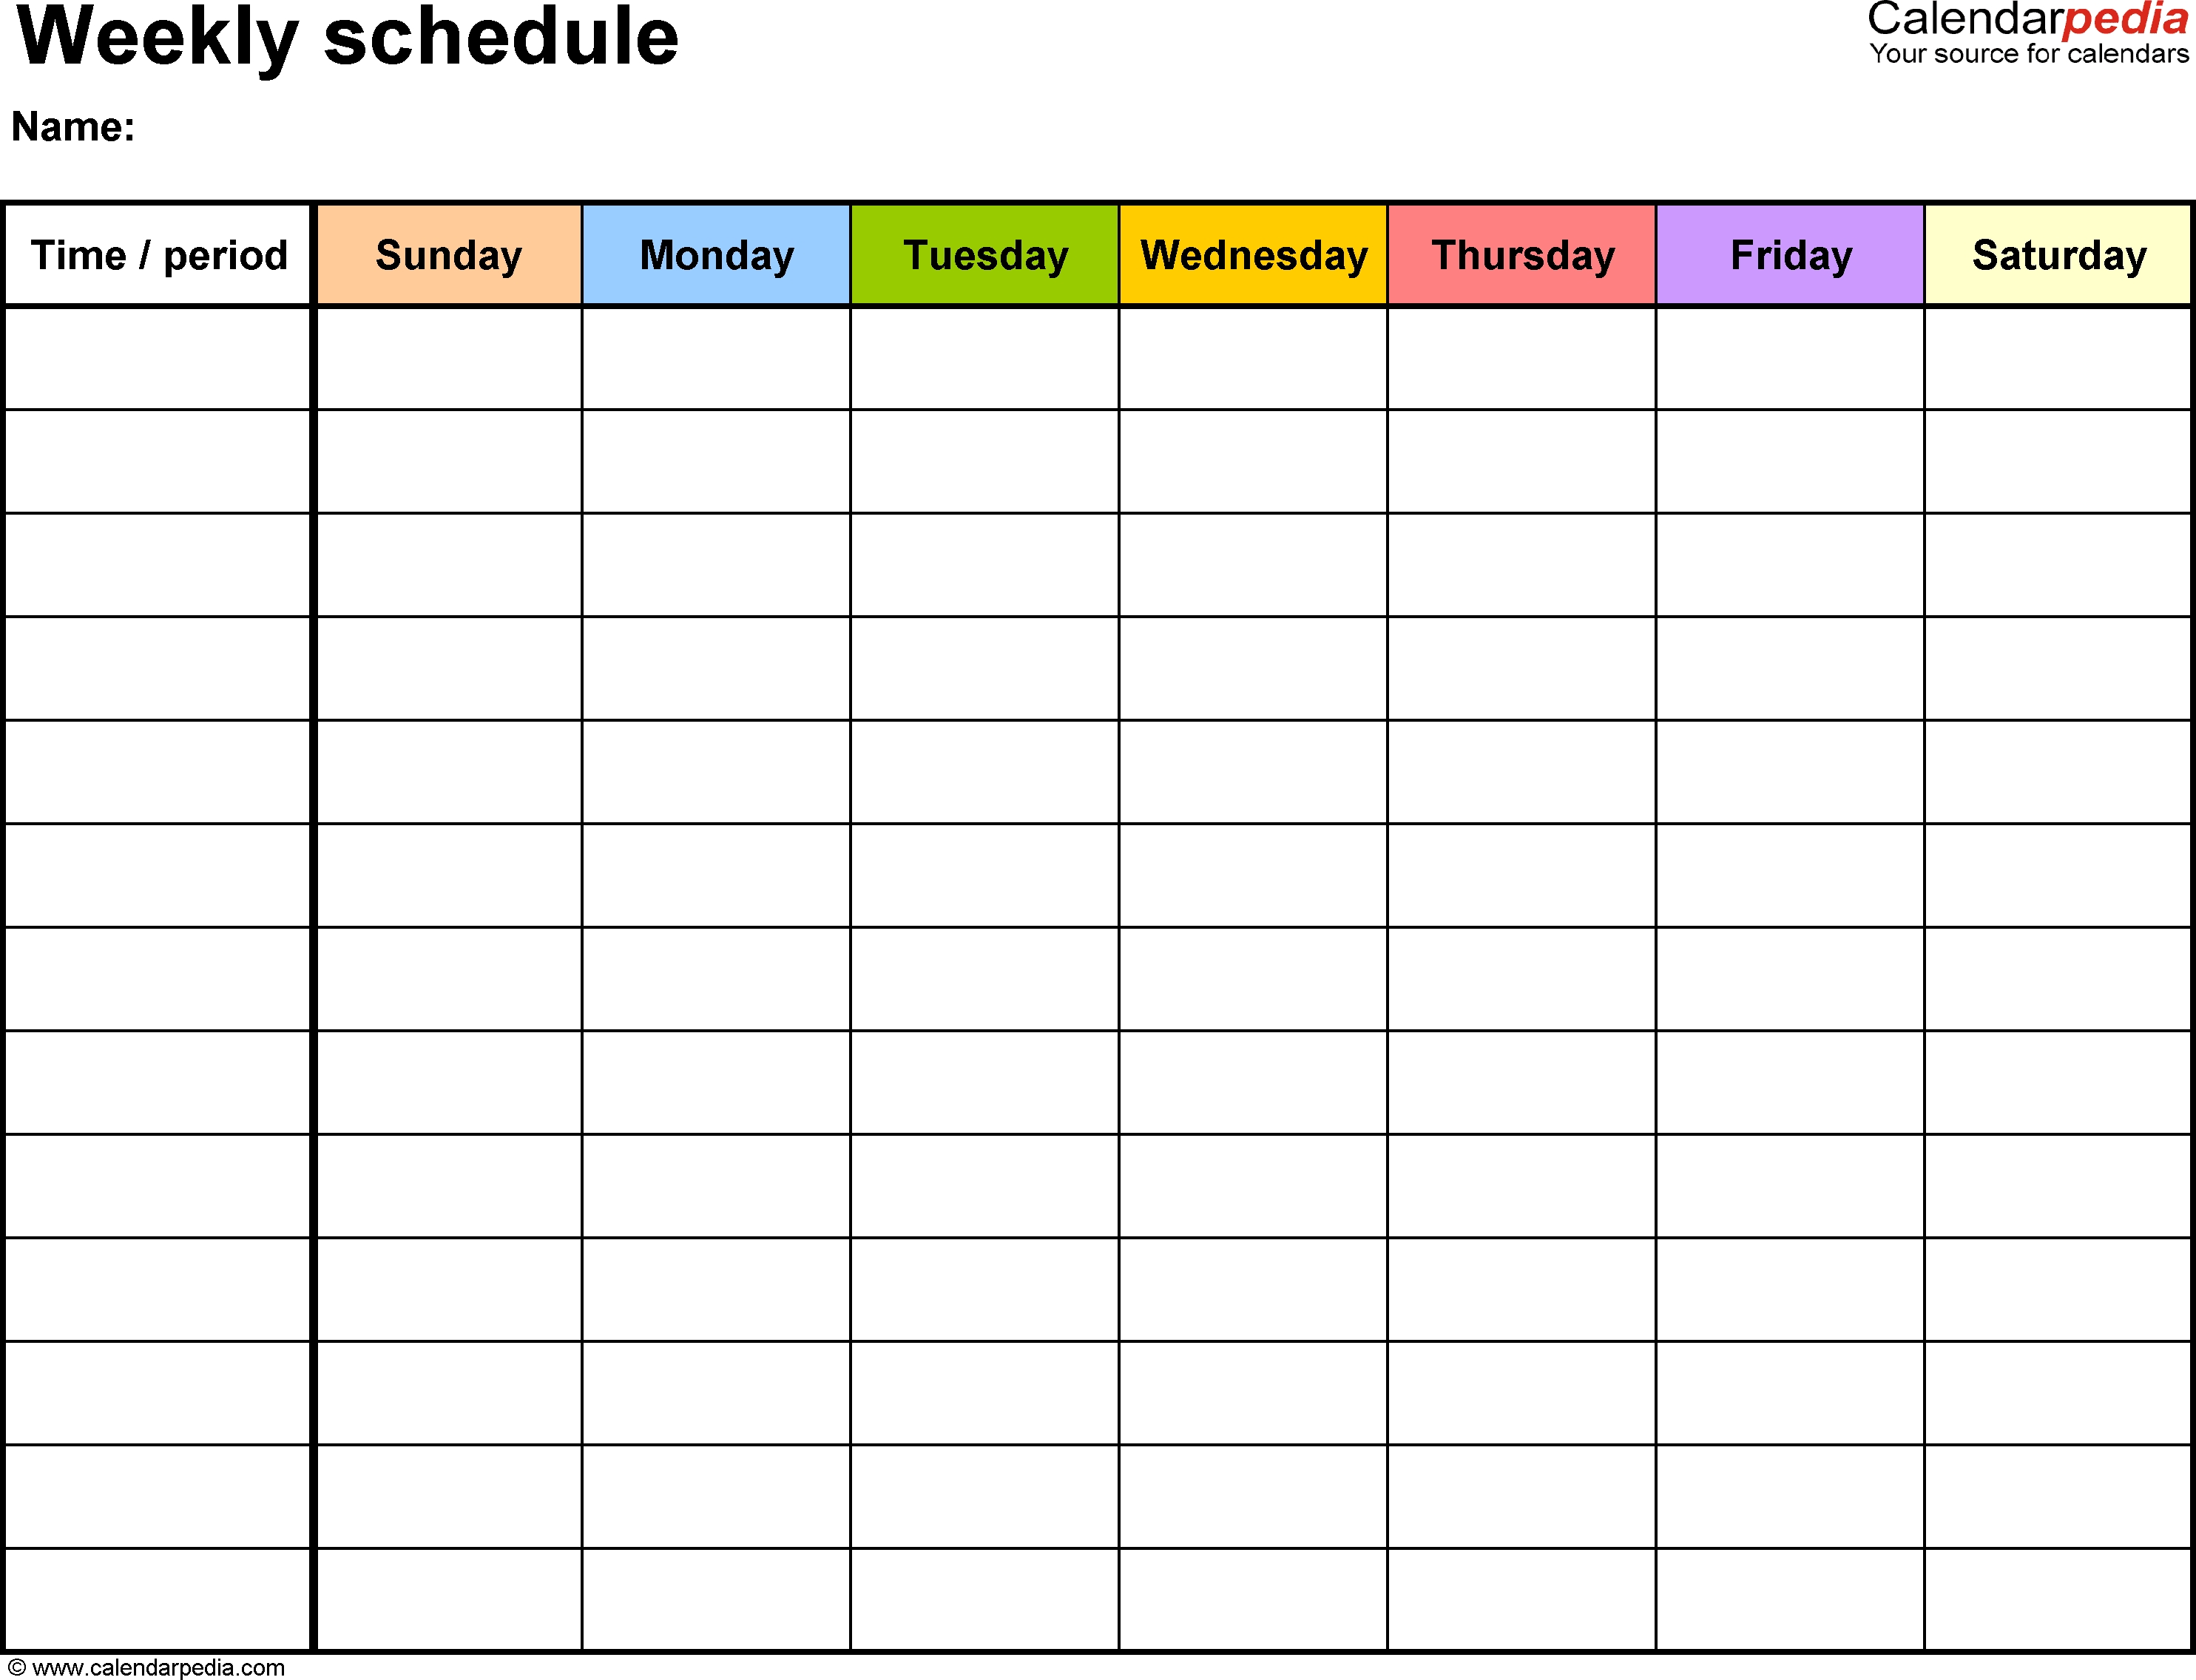 Free Weekly Schedule Templates For Word - 18 Templates Free Calendar Schedule Template